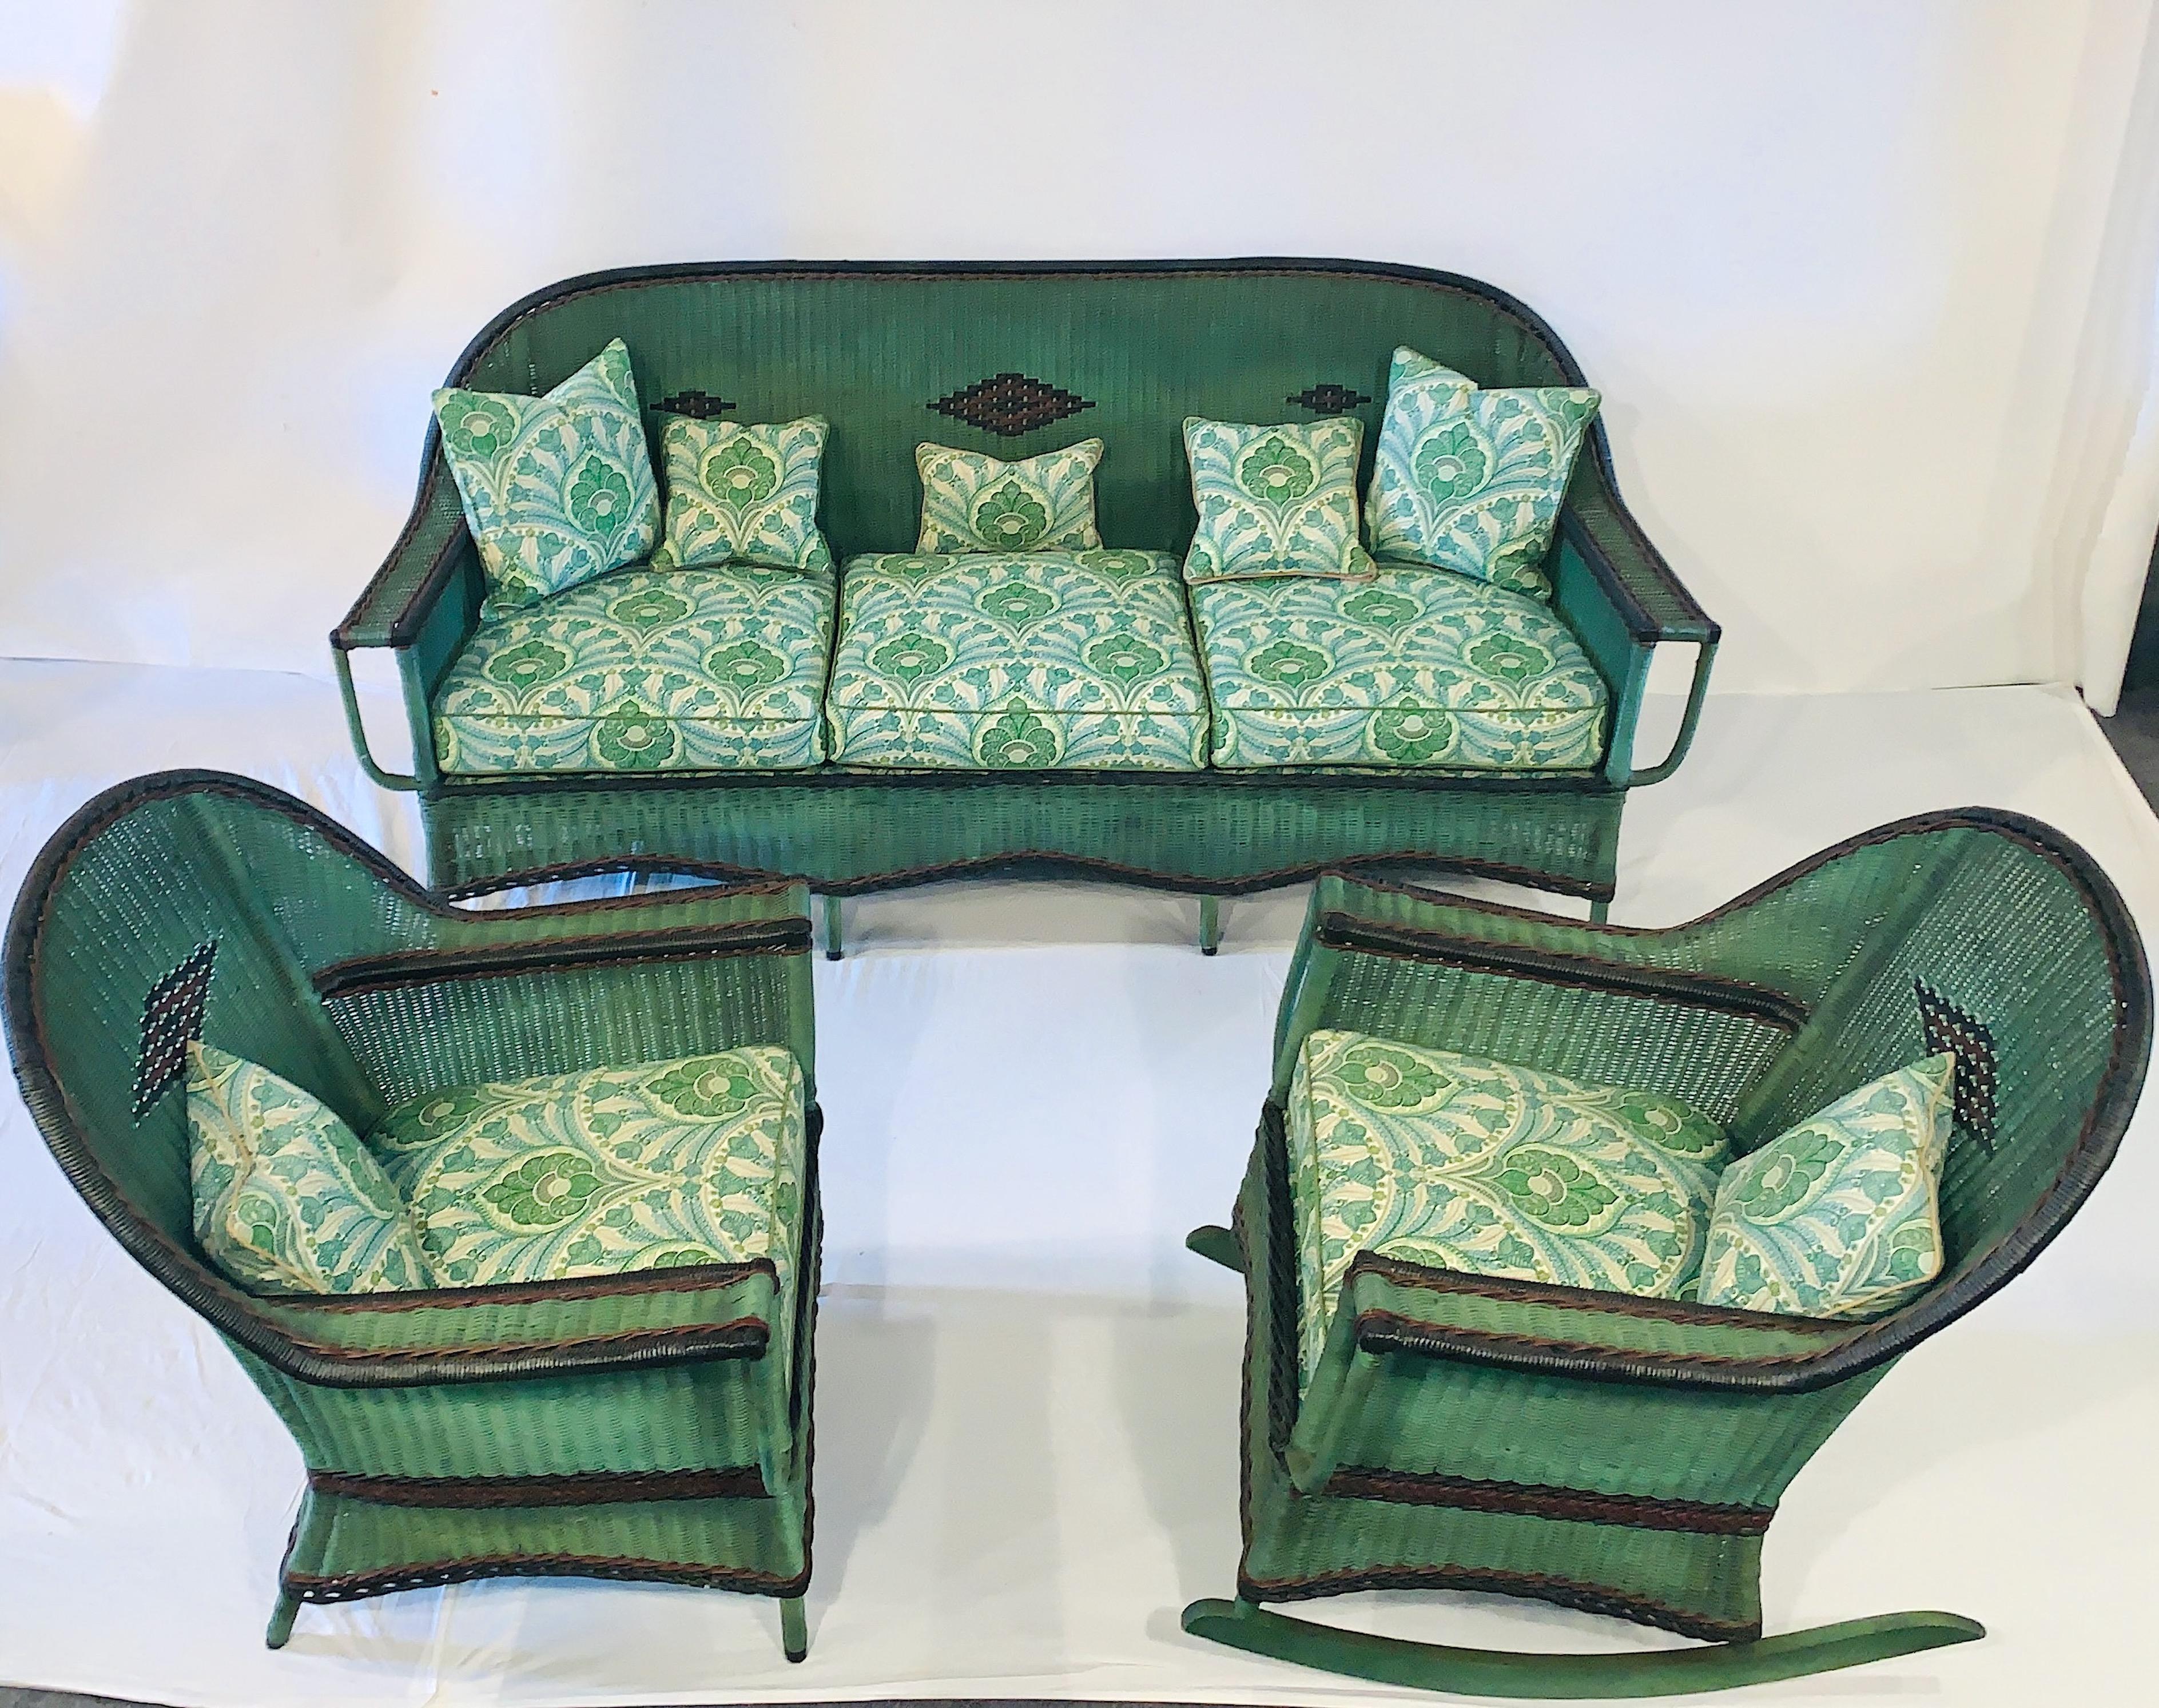 A beautiful matching close woven parlor or porch suite of Antique American Wicker consisting of a large three seat sofa ,a large matching armchair and a large comfortable relaxing rocking chair. The set is done in a stylish almost French green